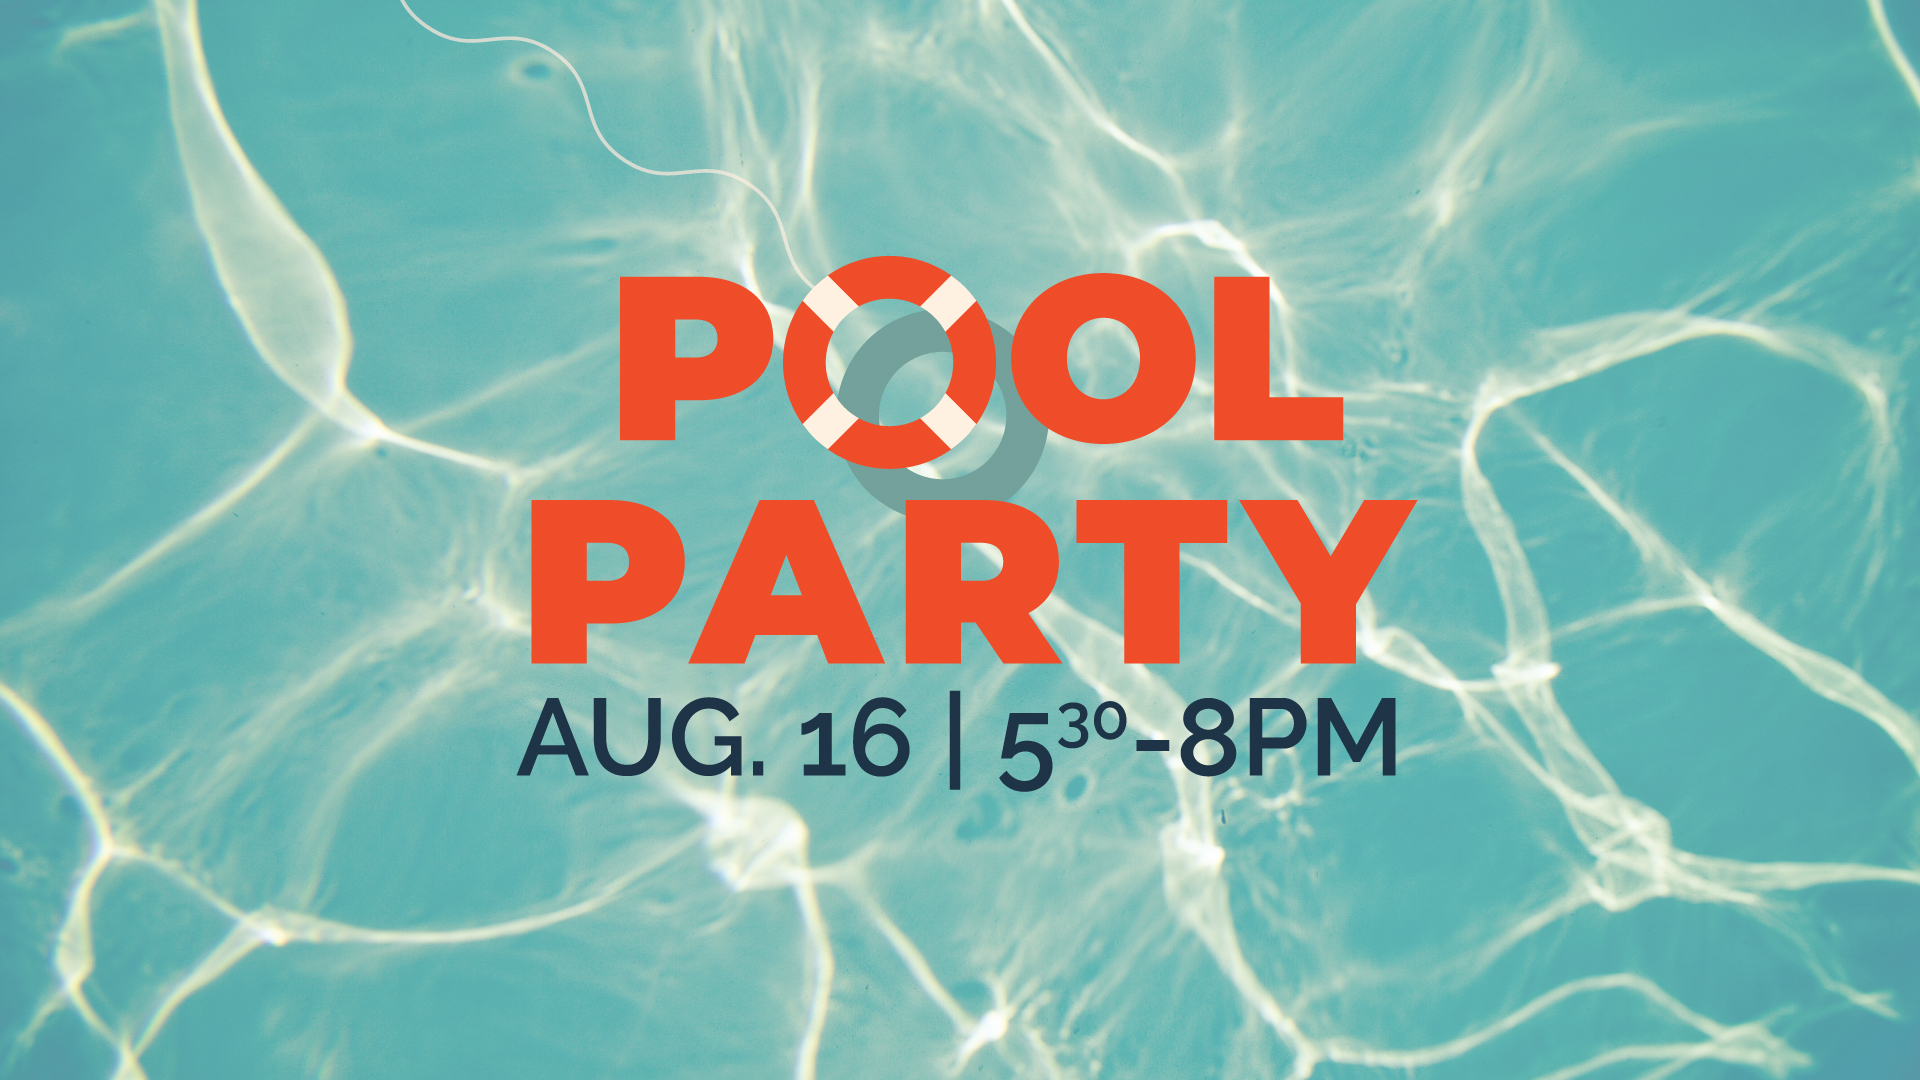 Students at Manor Pool Party | August 16 from 5:30-8PM